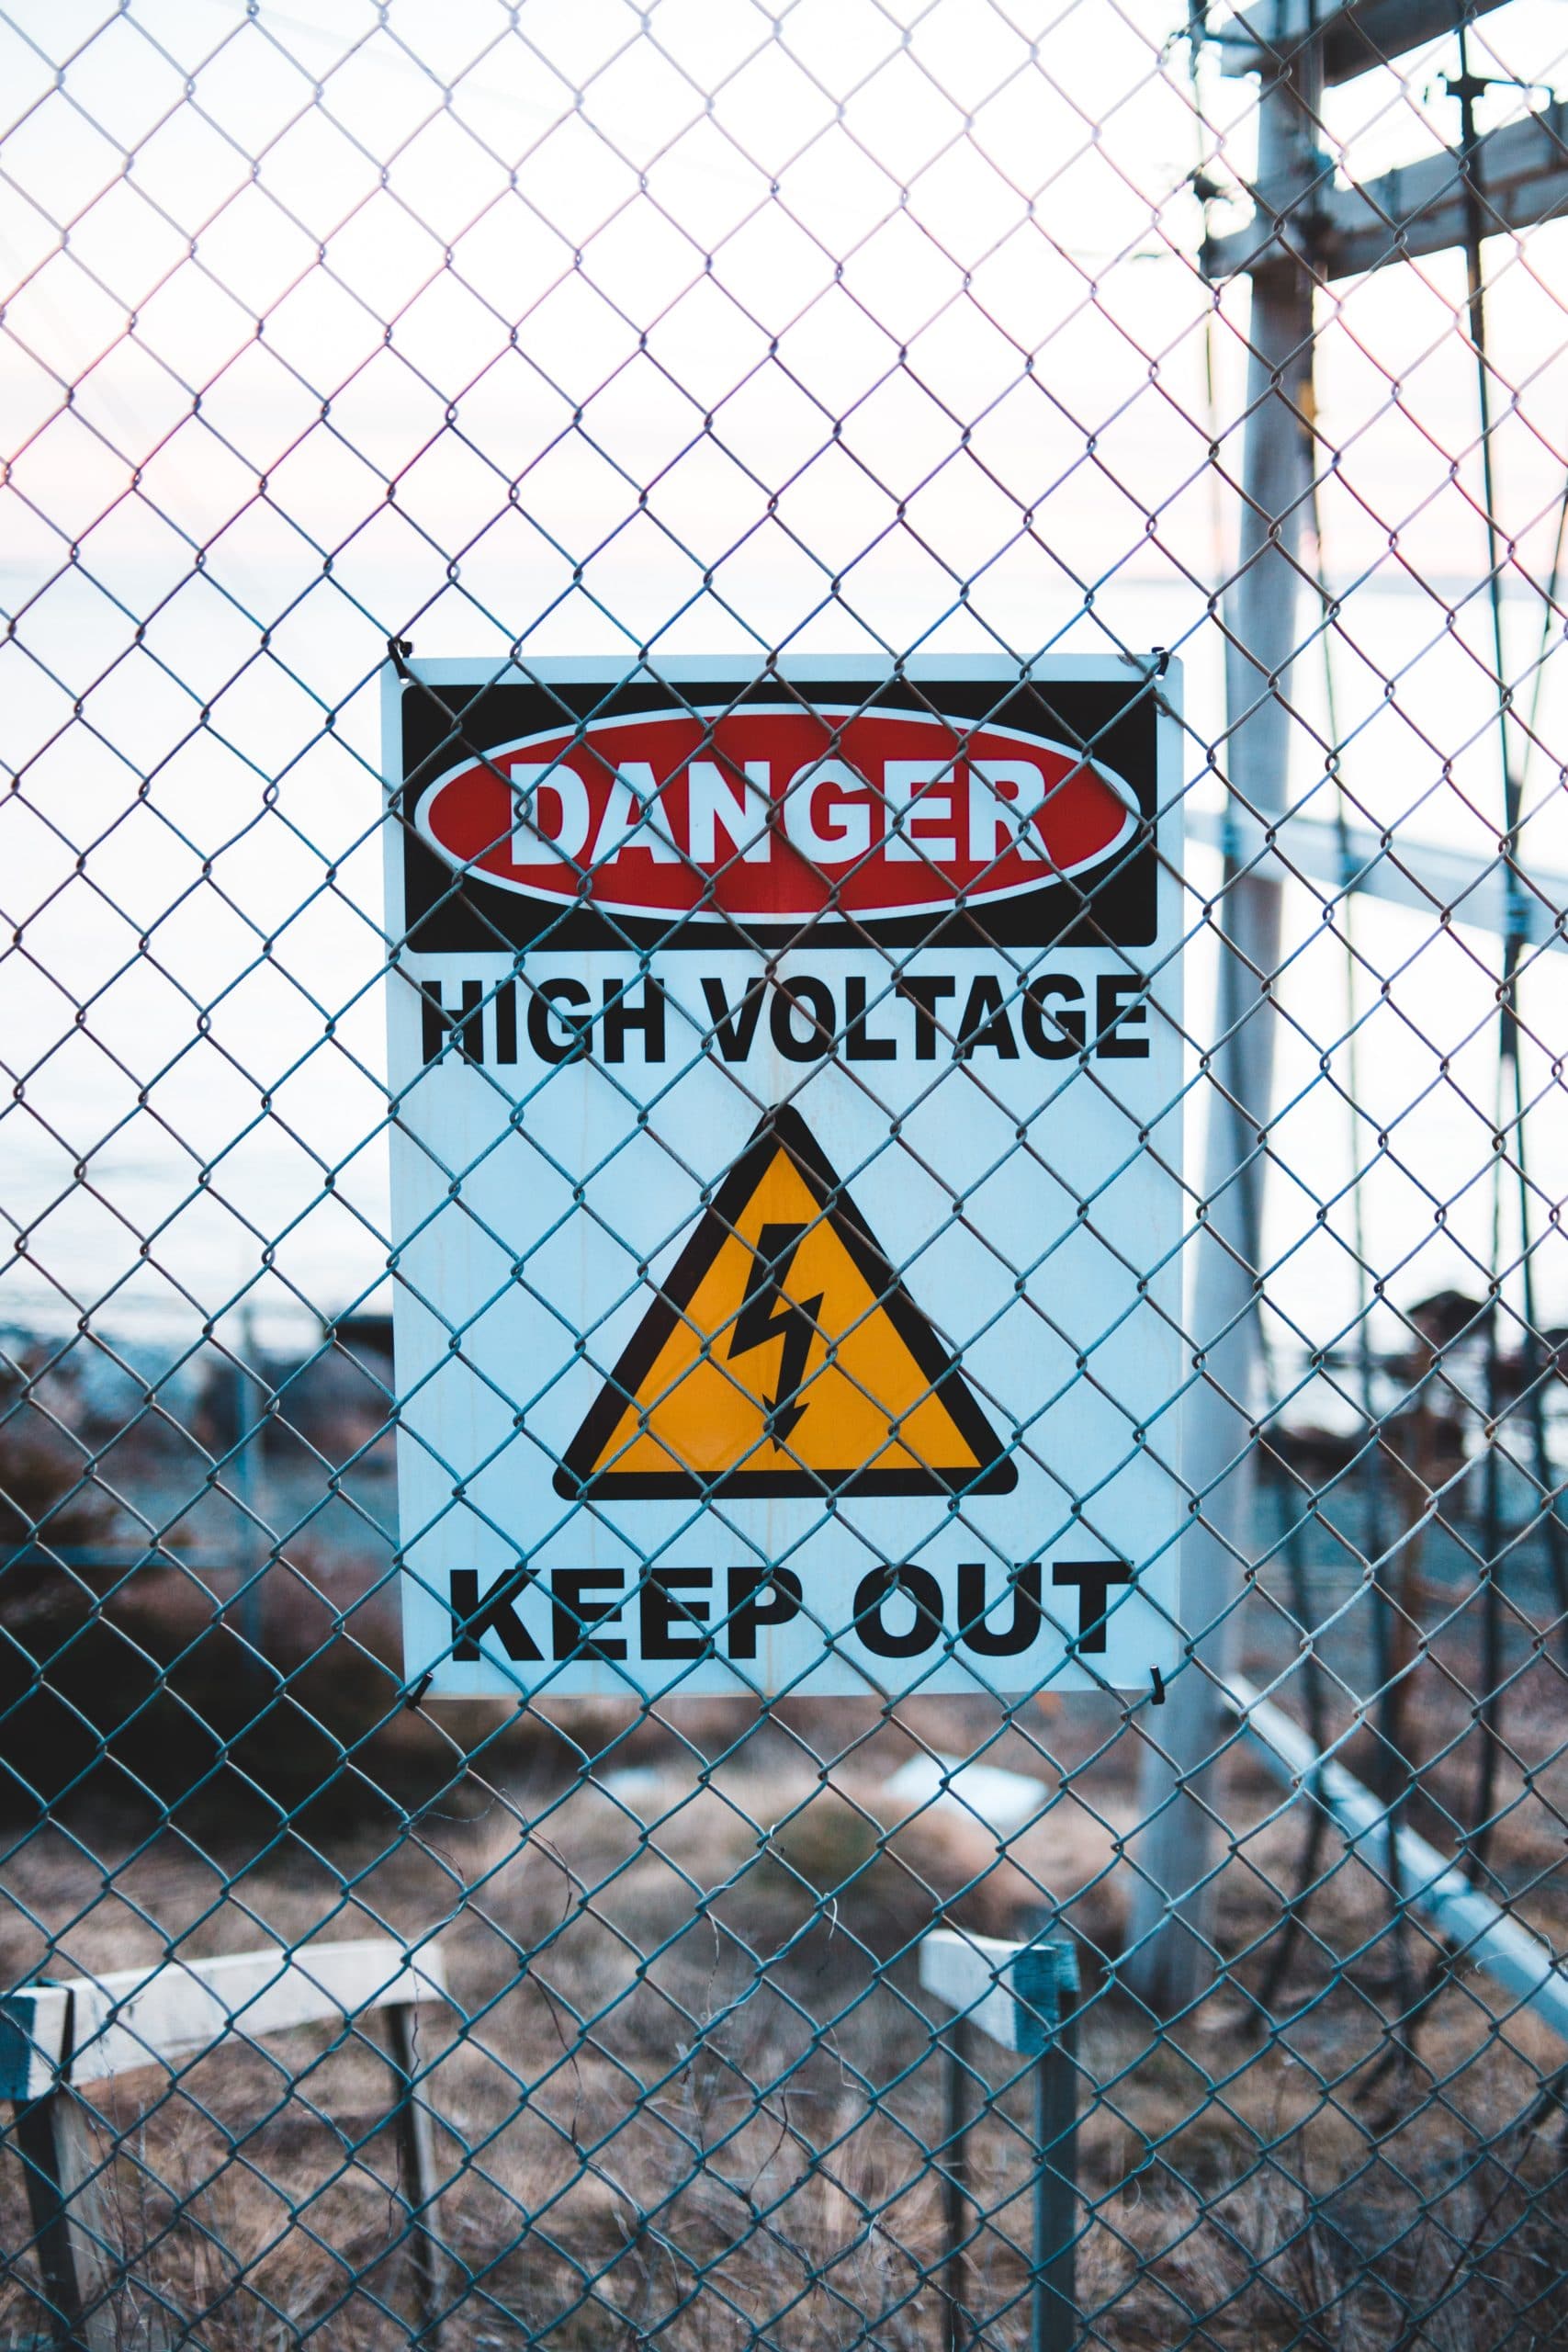 High Voltage Warning Sign board in NYC - Treatment for Electrocution in New York City